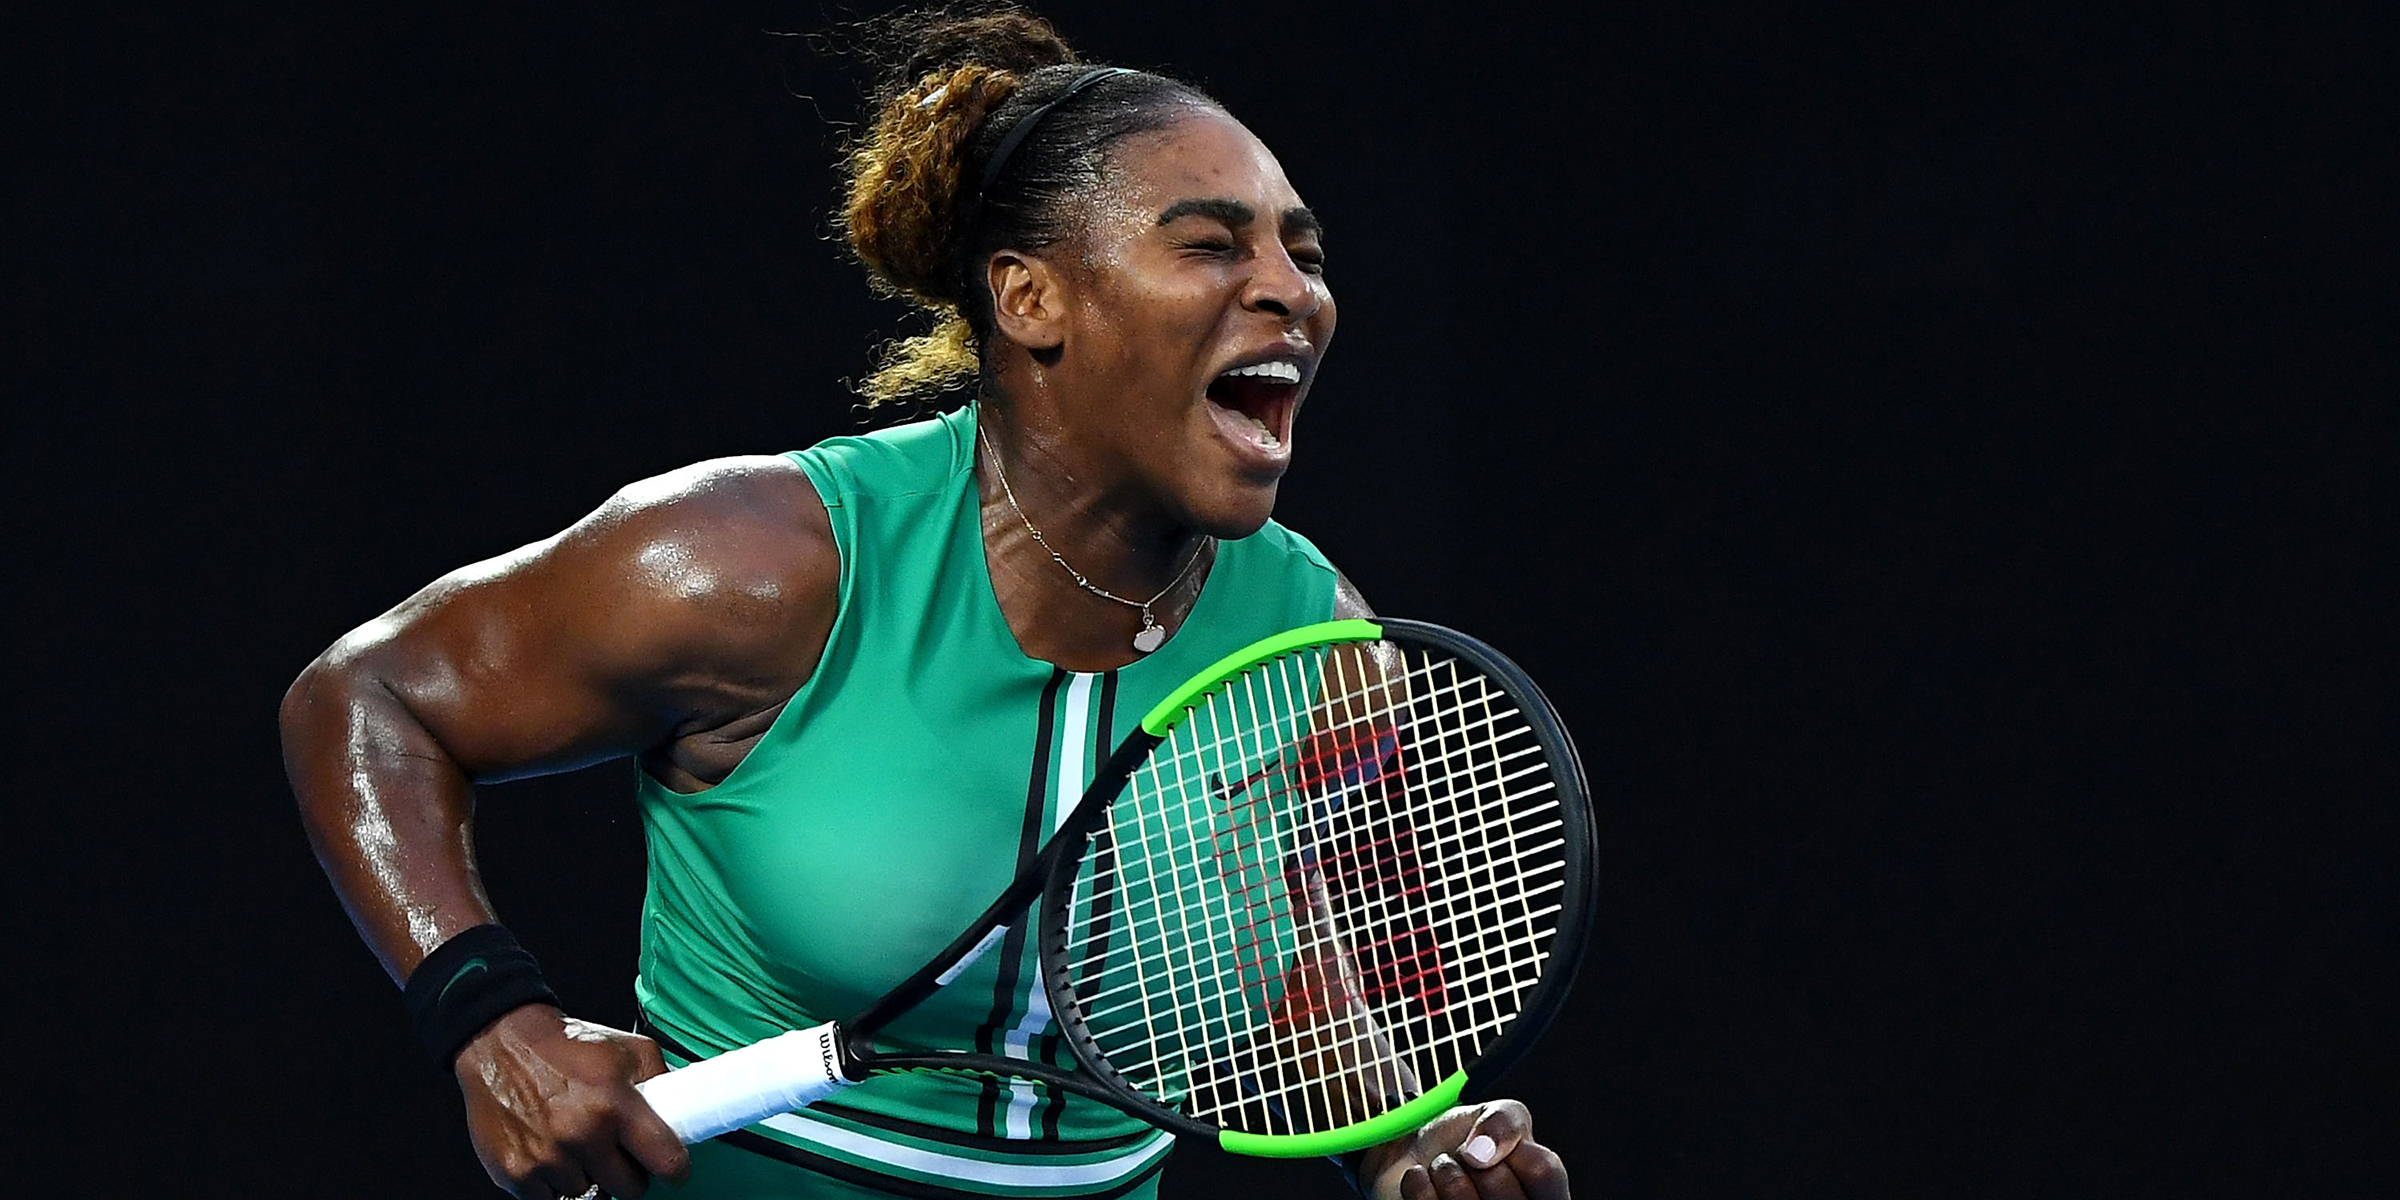 Cheated And Robbed' – Serena Williams Once Revealed Immense 